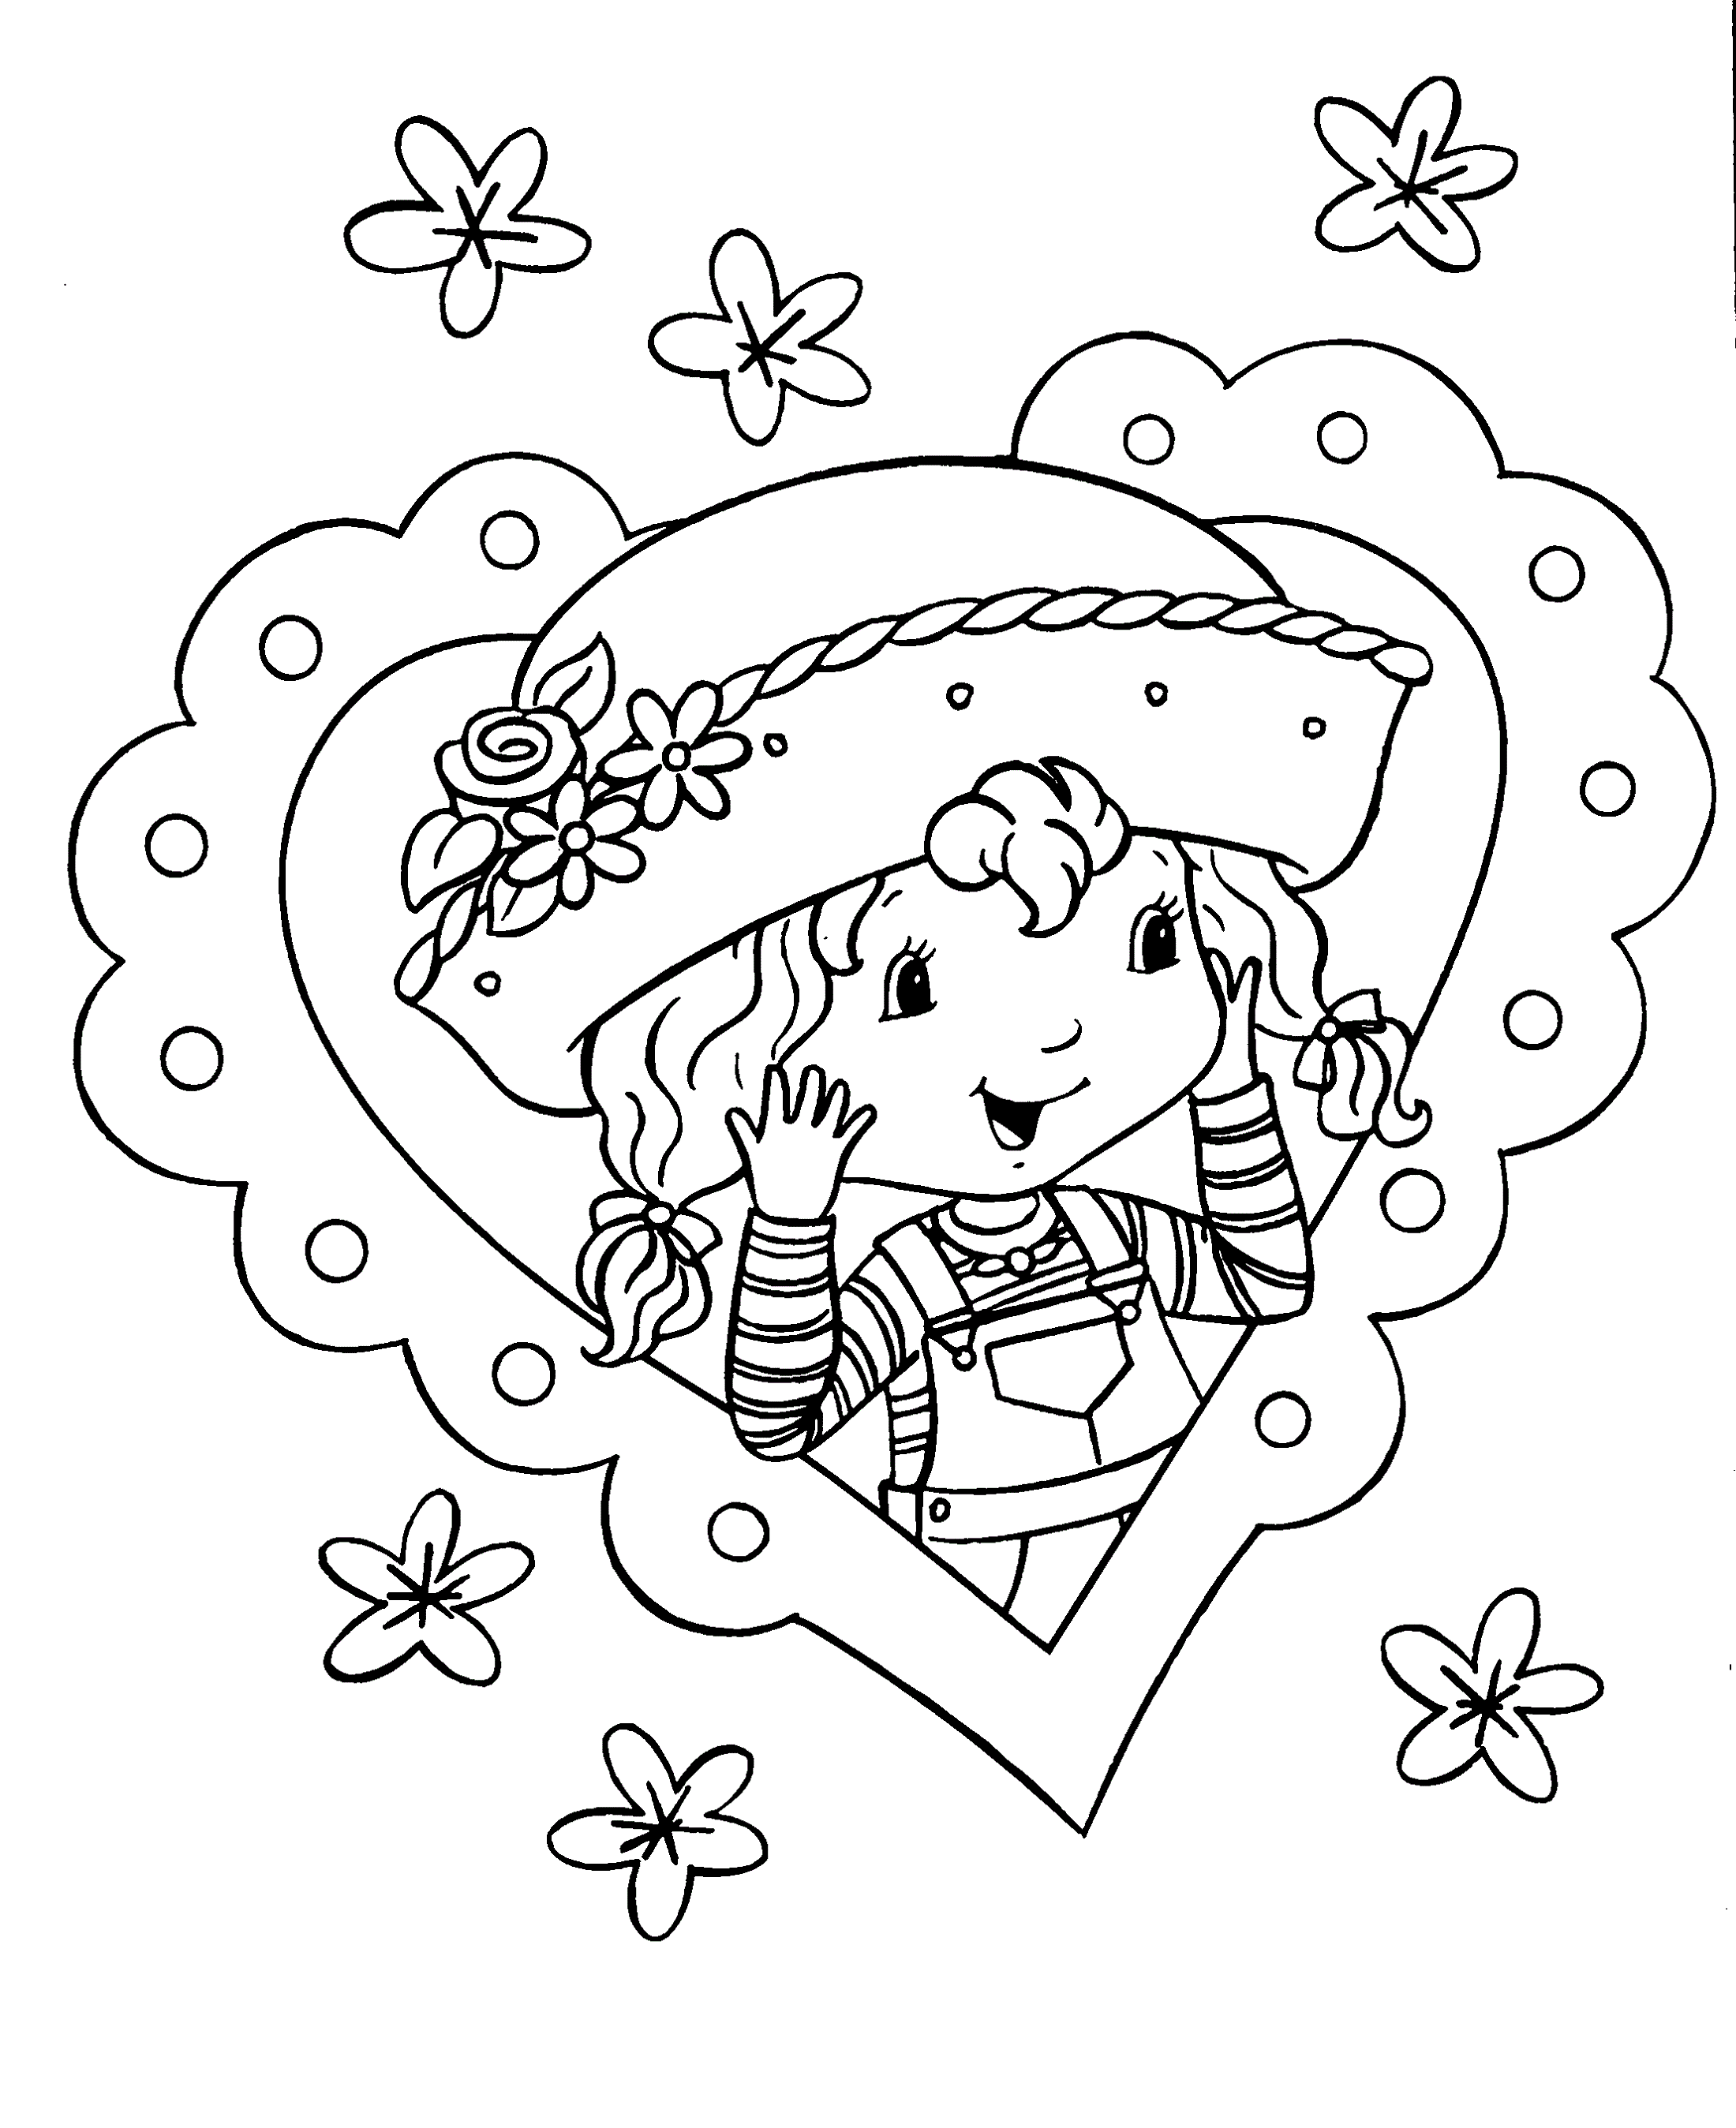 Strawberry Shortcake Coloring Pages for Children